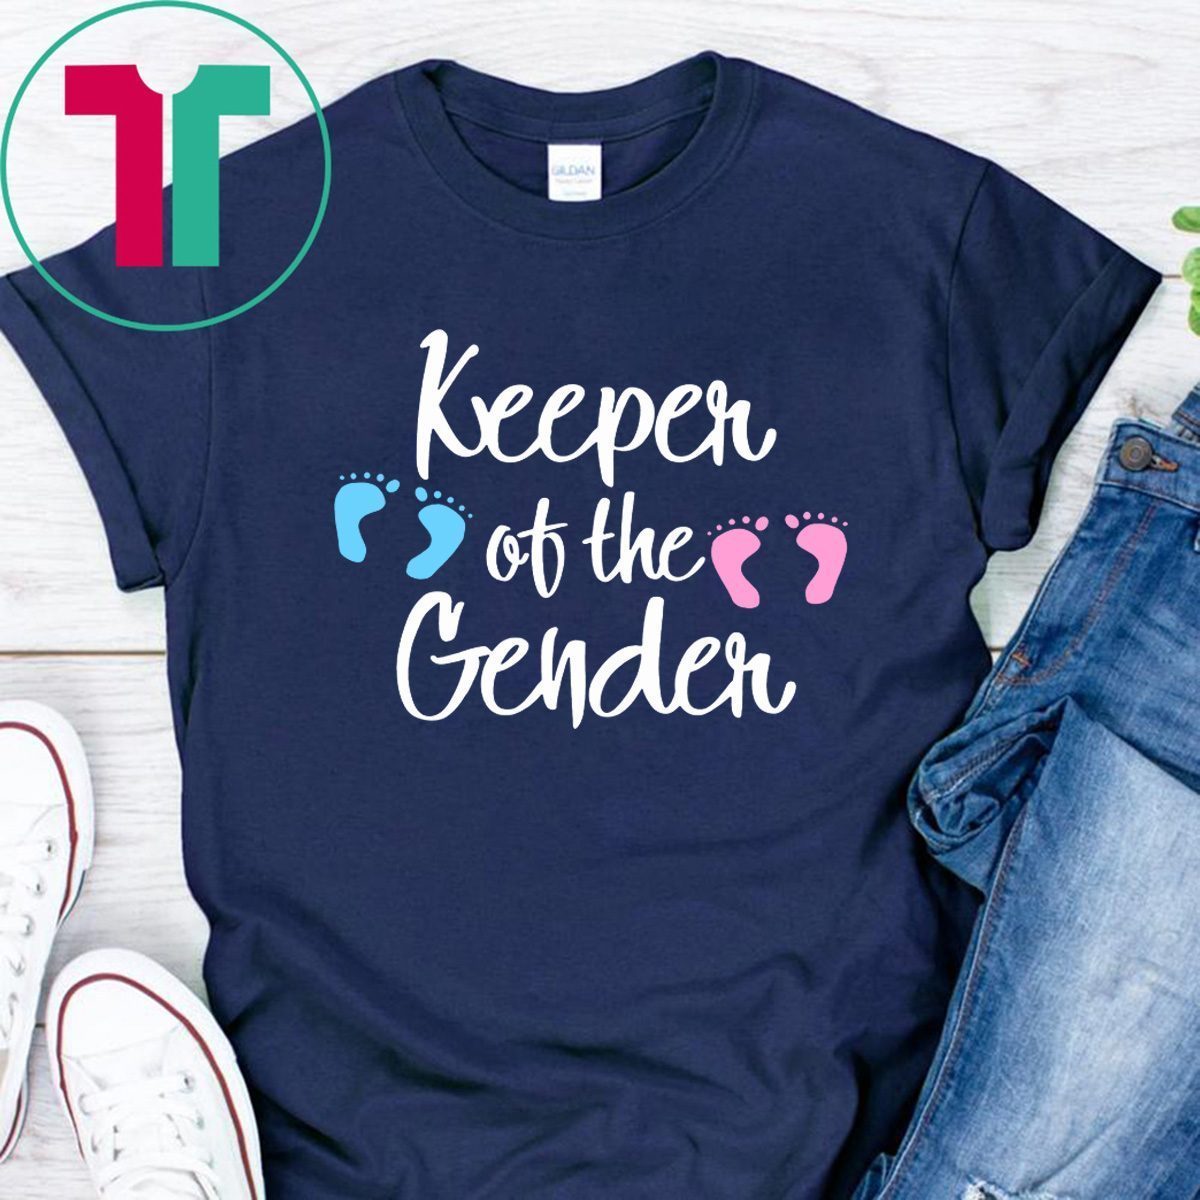 Keeper of Gender reveal party idea baby announcement shirt ...